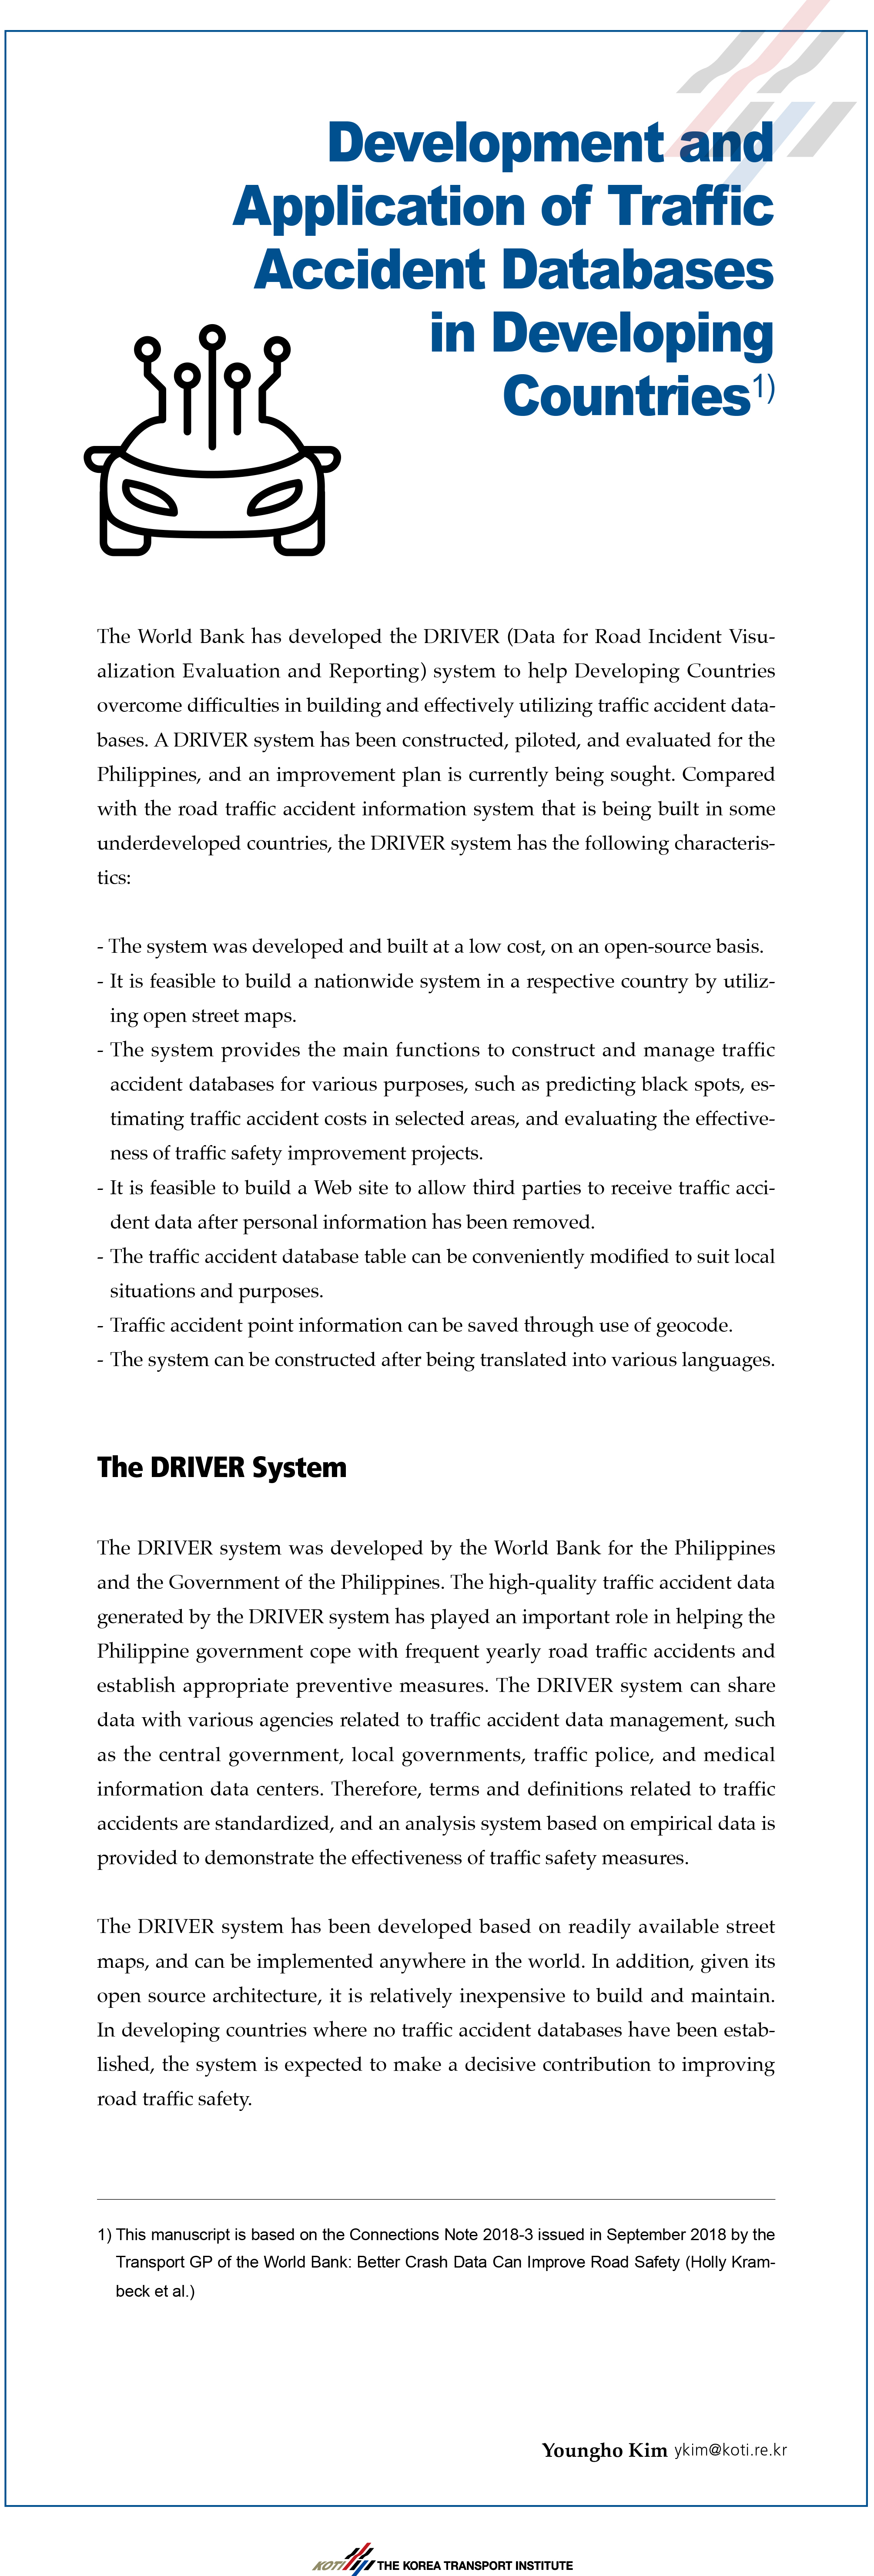 Development and Application of Traffic Accident Databases in Developing Countries